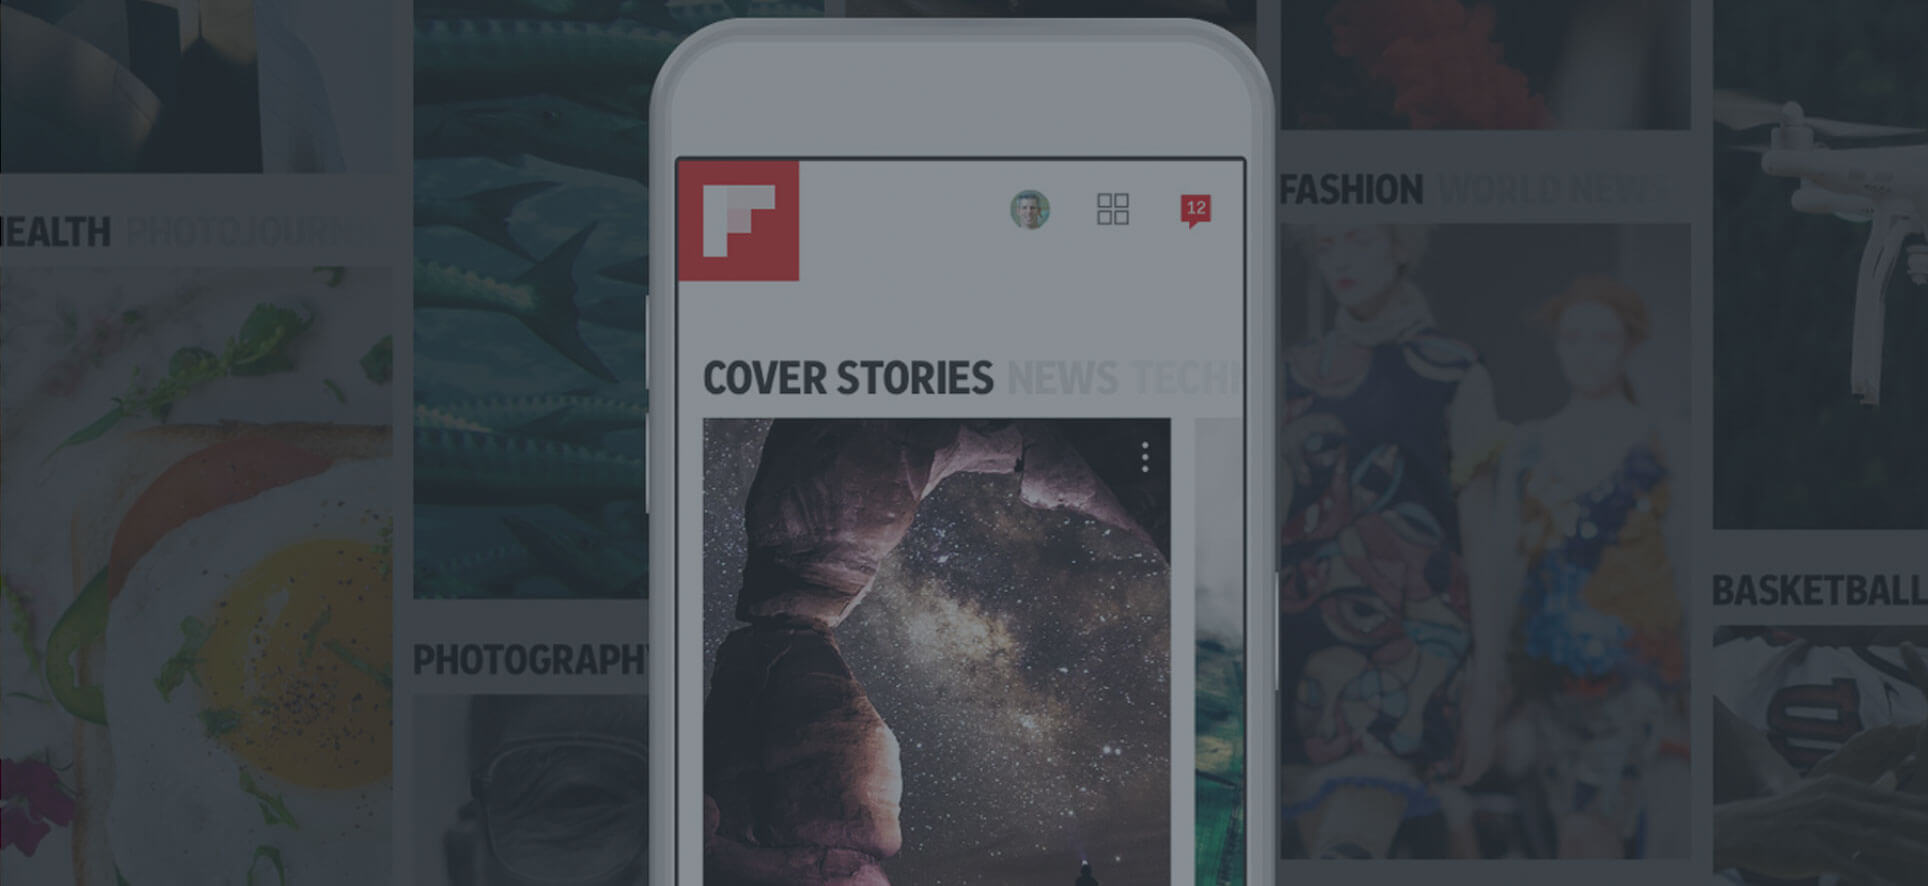 Flipboard, the secret weapon every content marketer should use